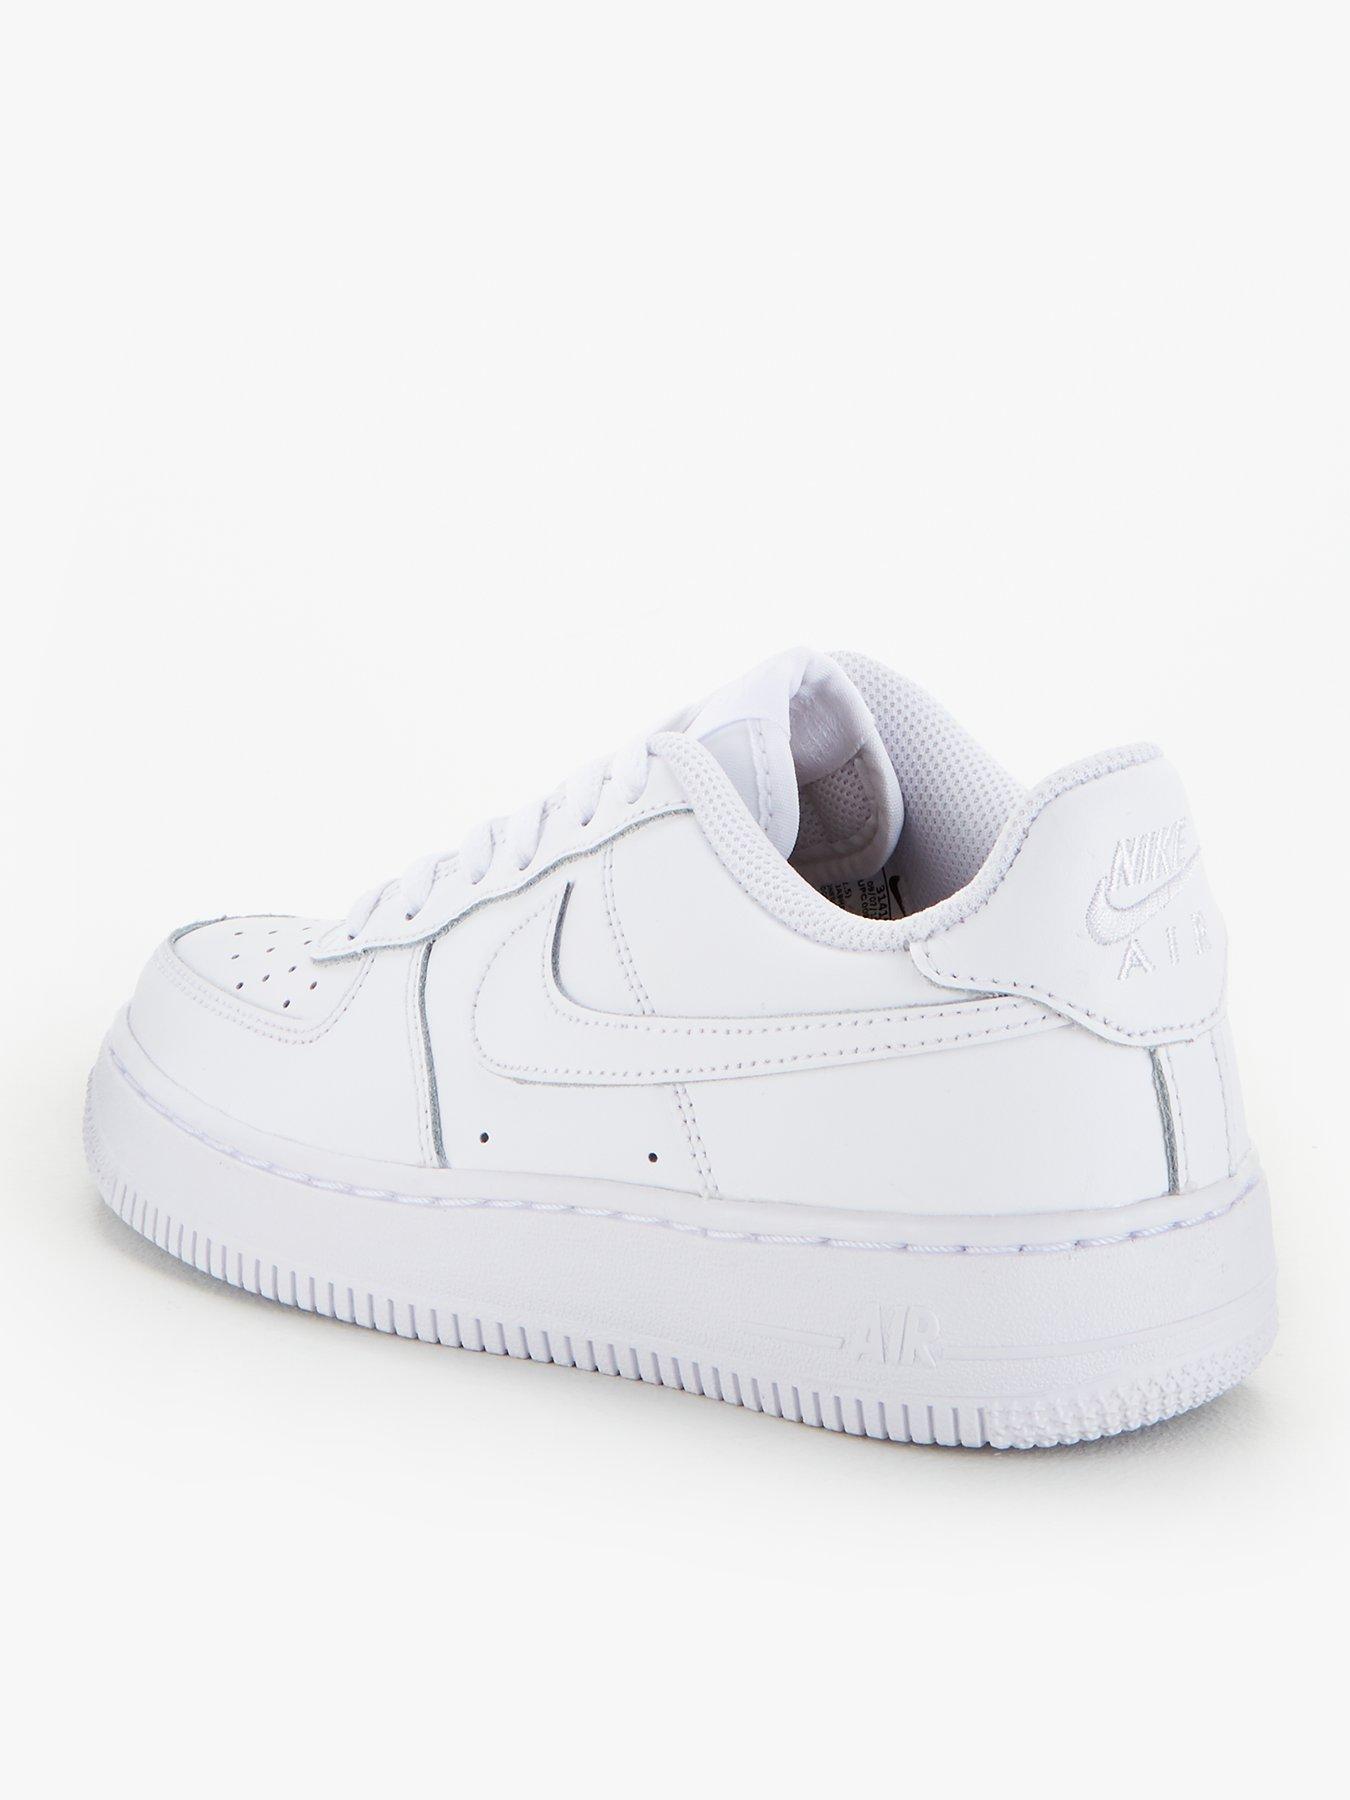 air force 1 white junior size 4